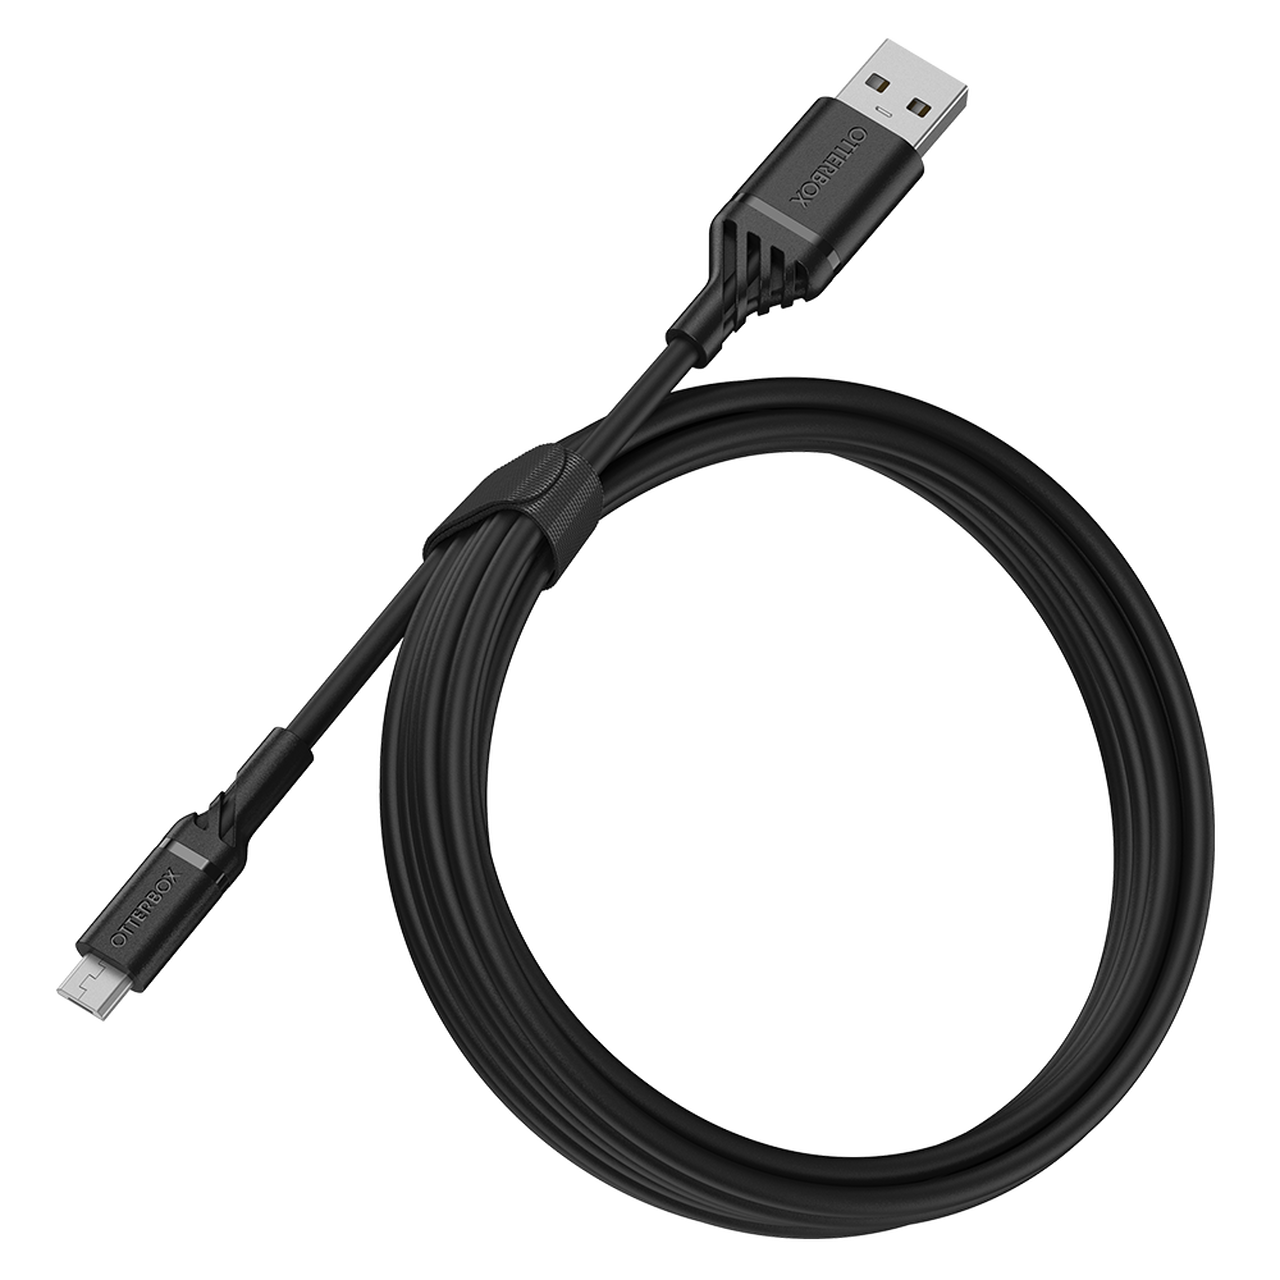 Otterbox 6 Ft Ultra Durable Standard USB A to Micro USB Cable - Black